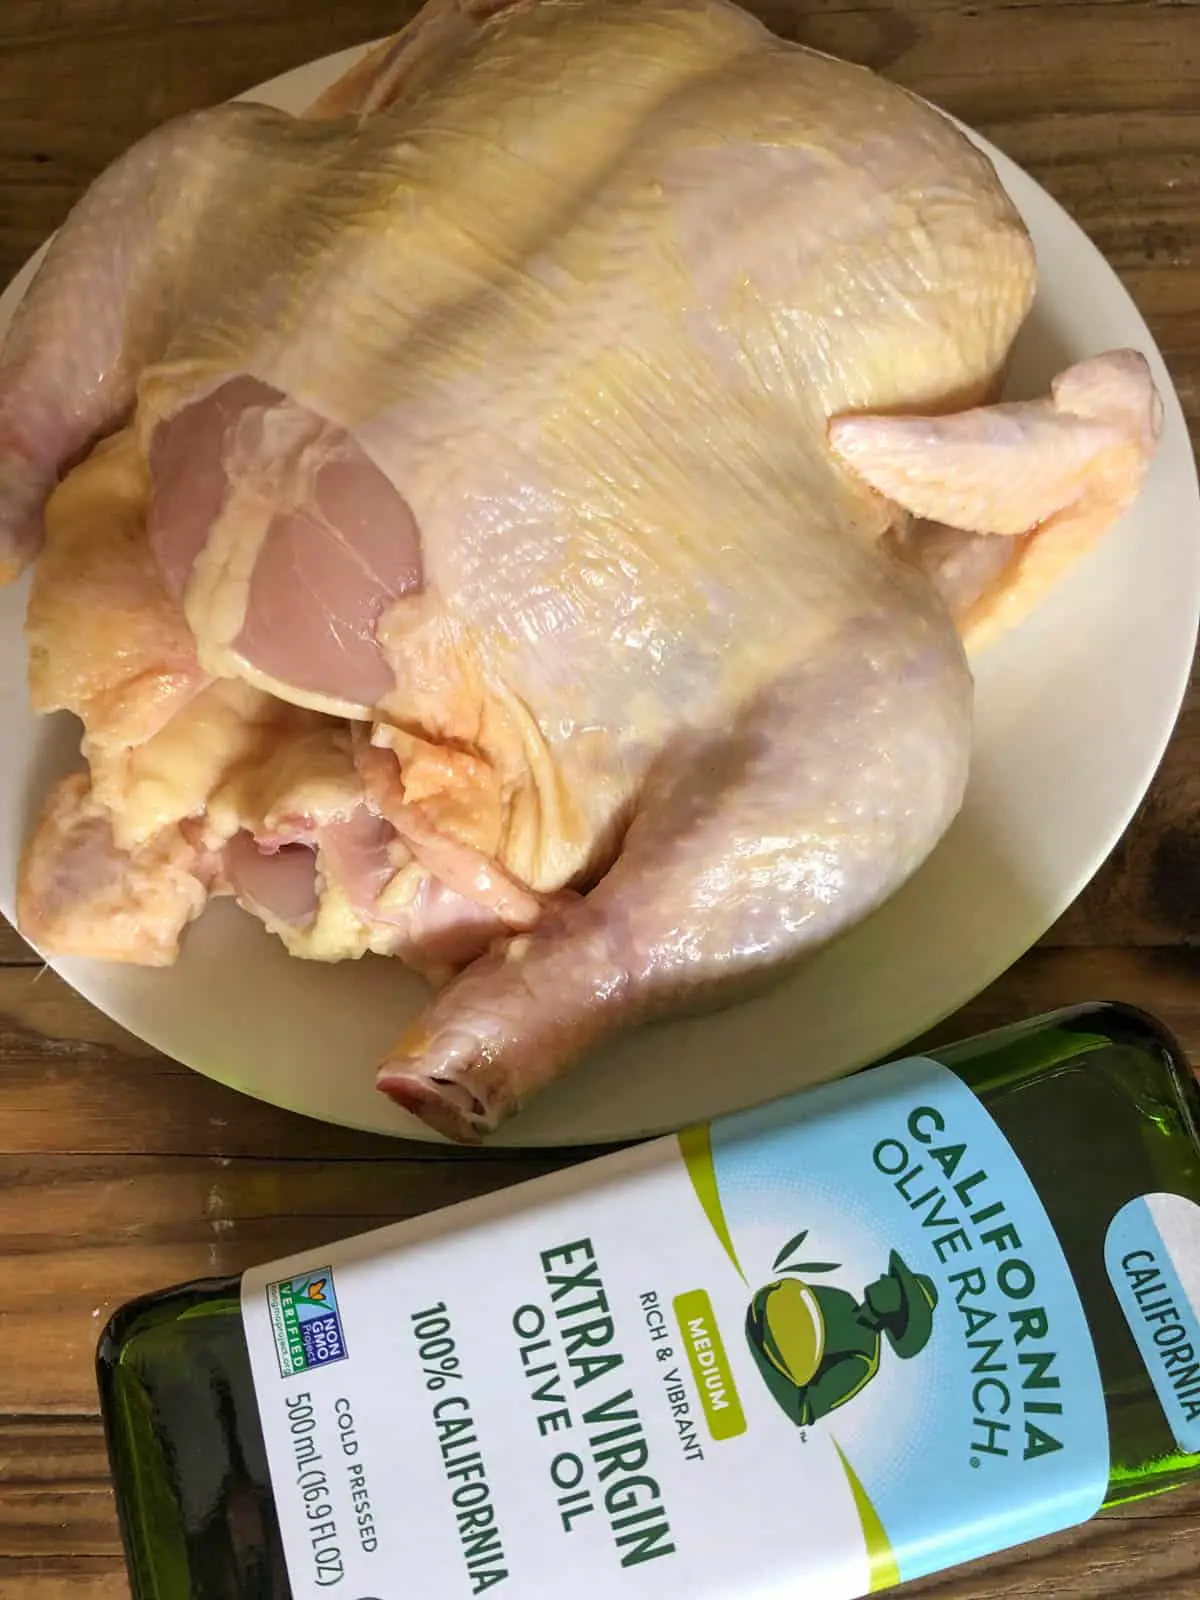 An uncooked whole chicken on a white plate with a bottle of extra virgin olive oil next to it.